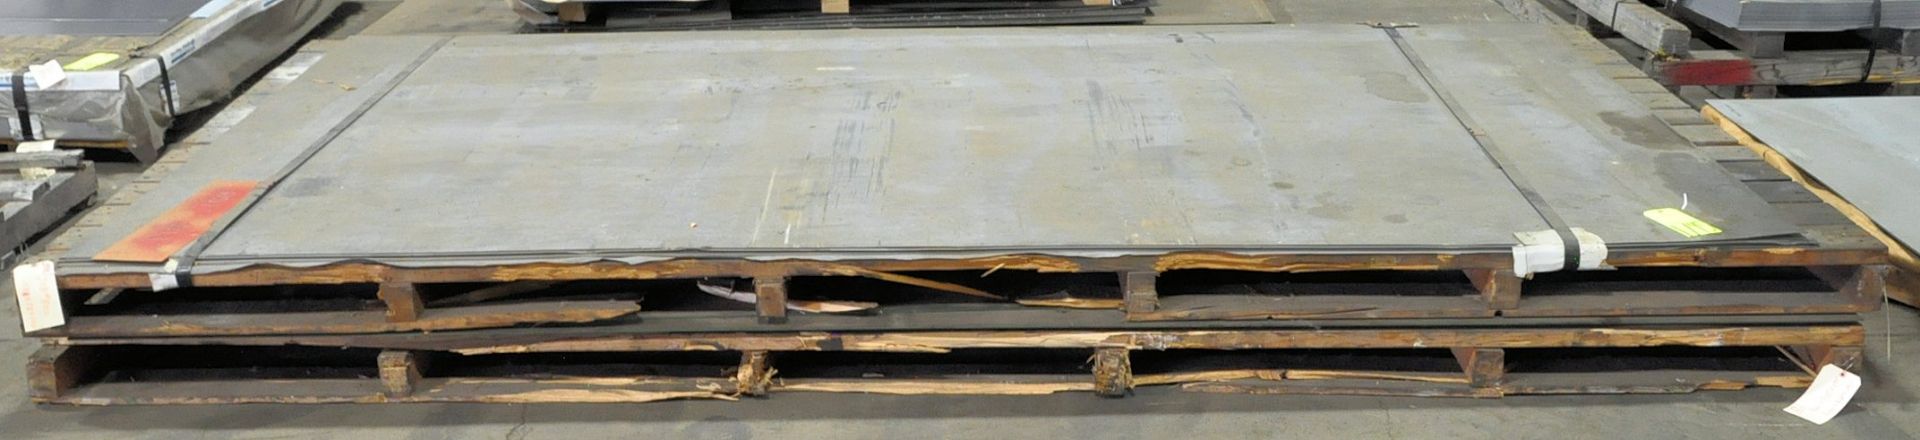 Lot-.160 x 28 1/2" x 144 1/2" and .033 x 72" x 140" Sheet Metal Stock on (2) Pallets in (1)